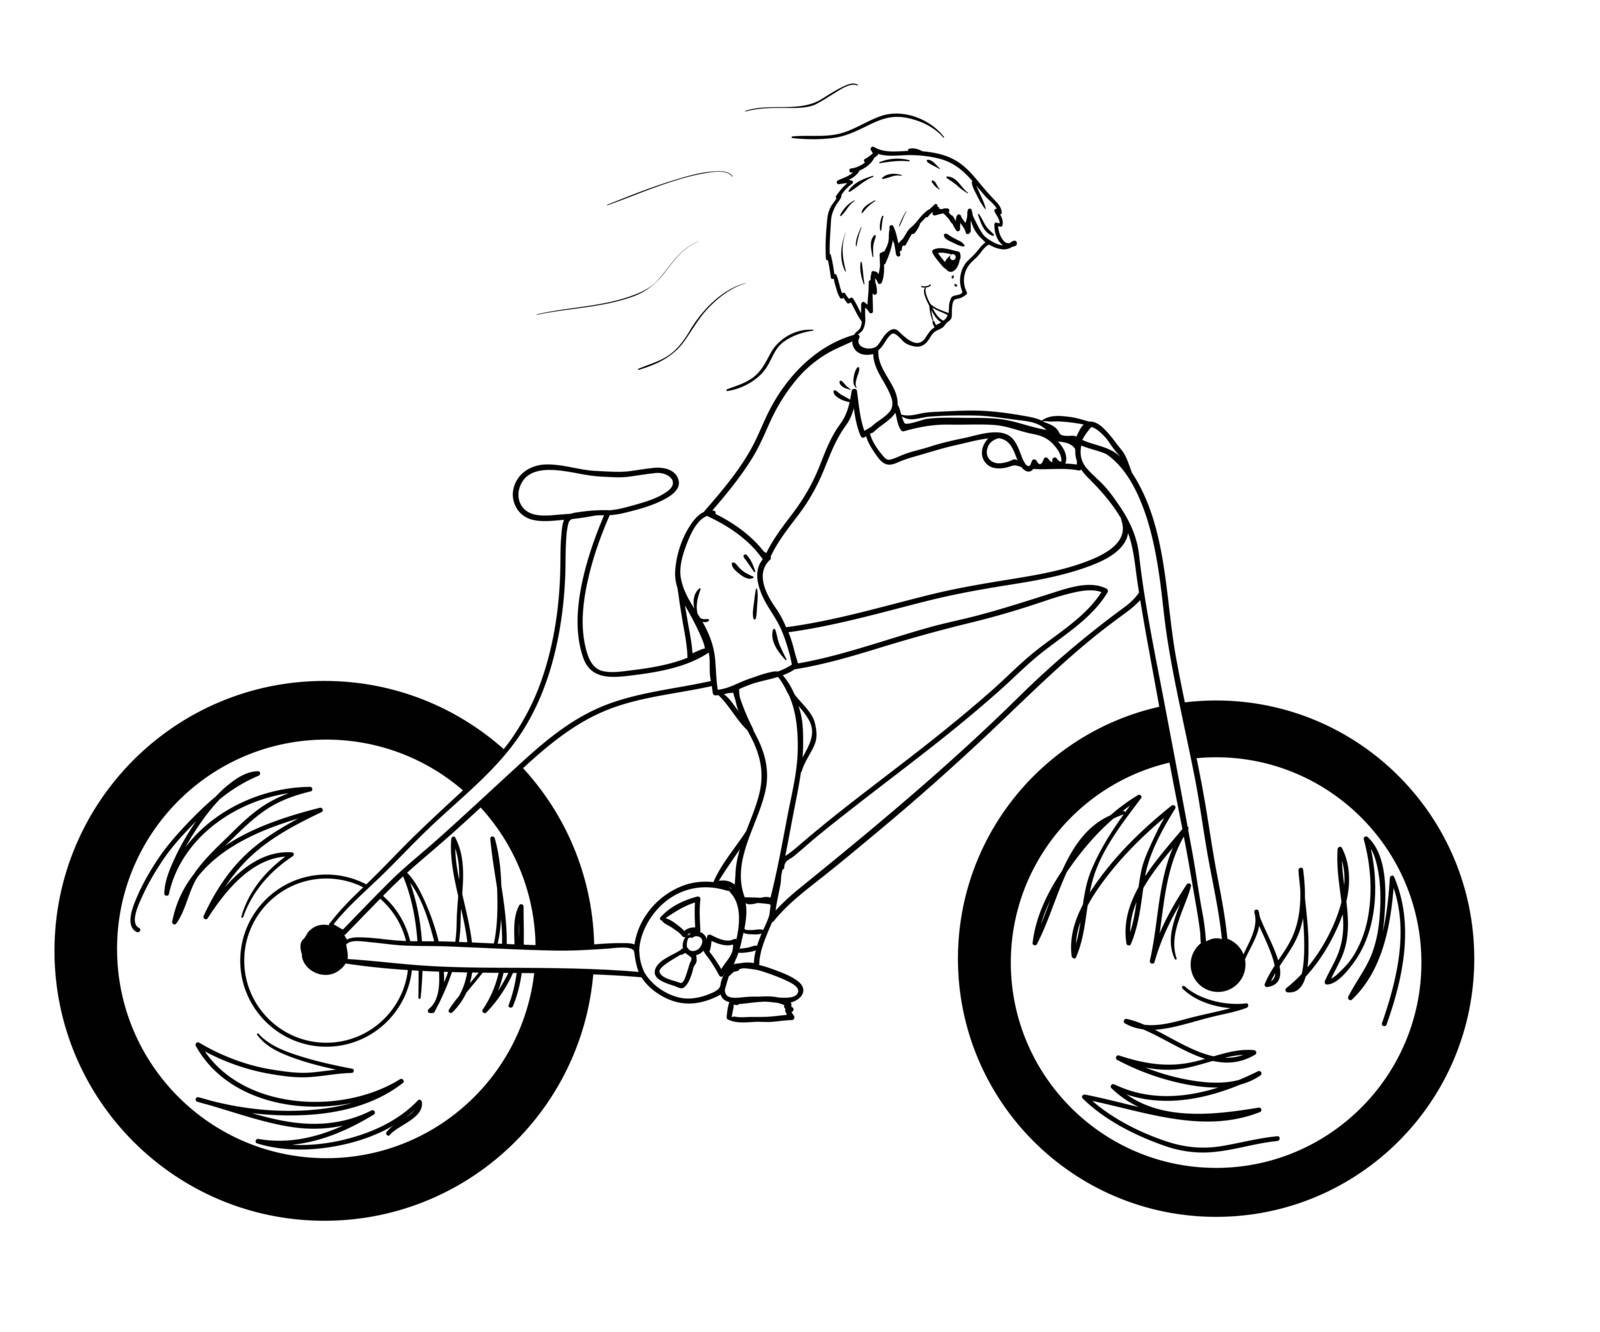  Kid with too big bicycle. Vector illustration eps8